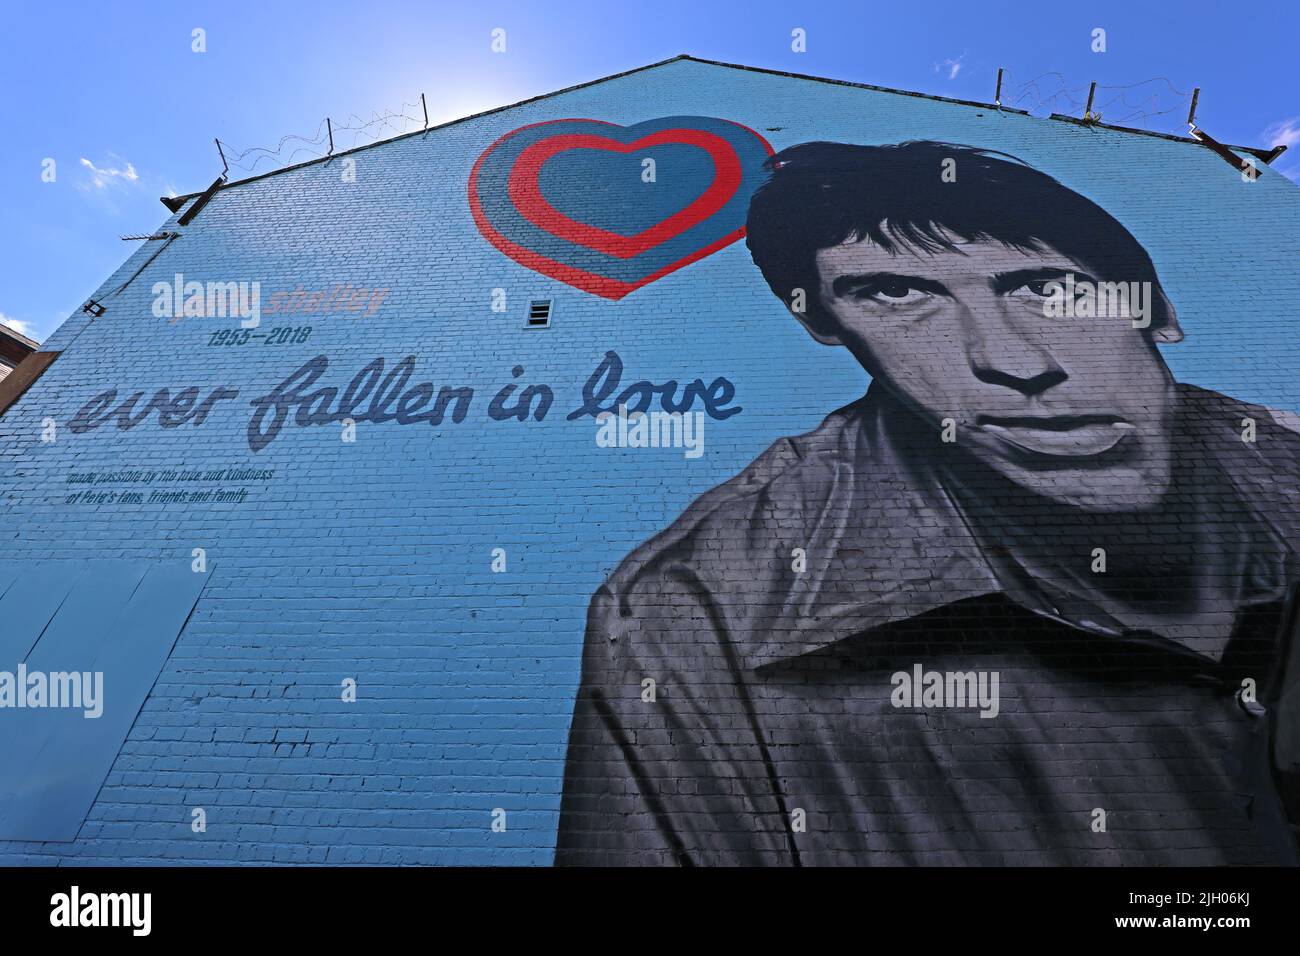 Even Fallen In Love, with someone you shouldnt have, Pete Shelley memorial mural by Akse P19, in Leigh town centre, Greater Manchester, England Stock Photo